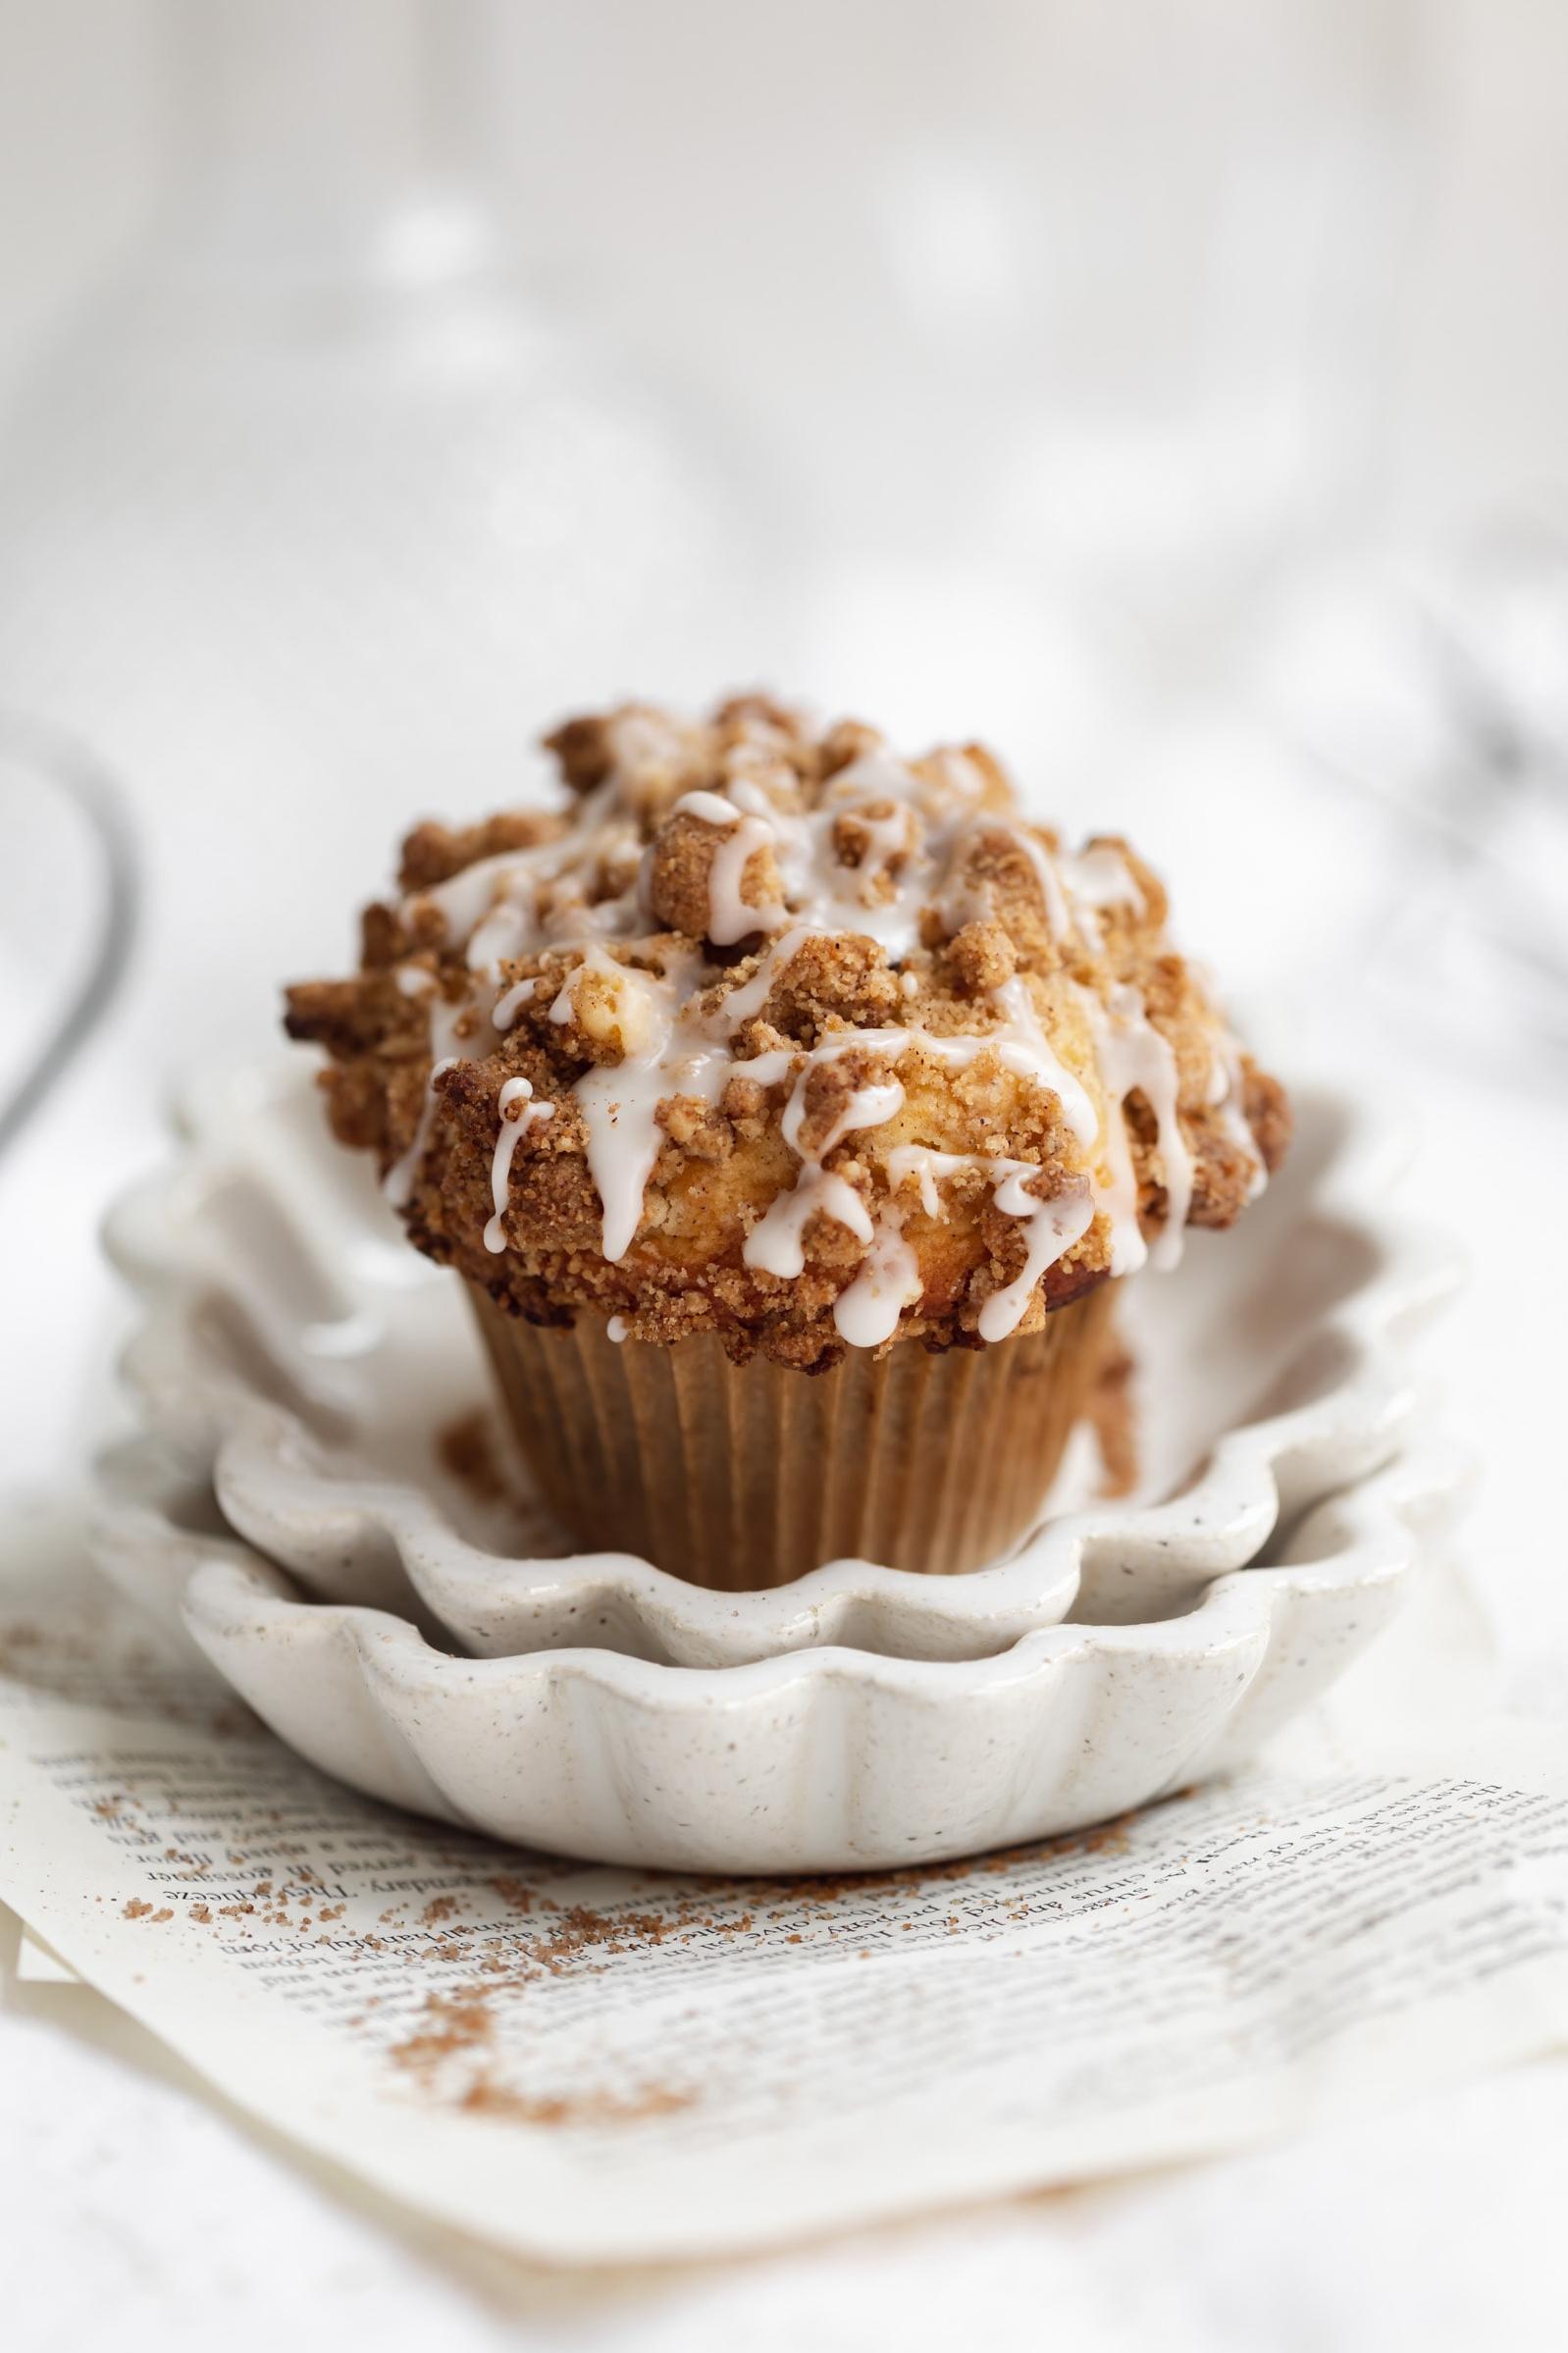  These muffins are packed full of cinnamon goodness.